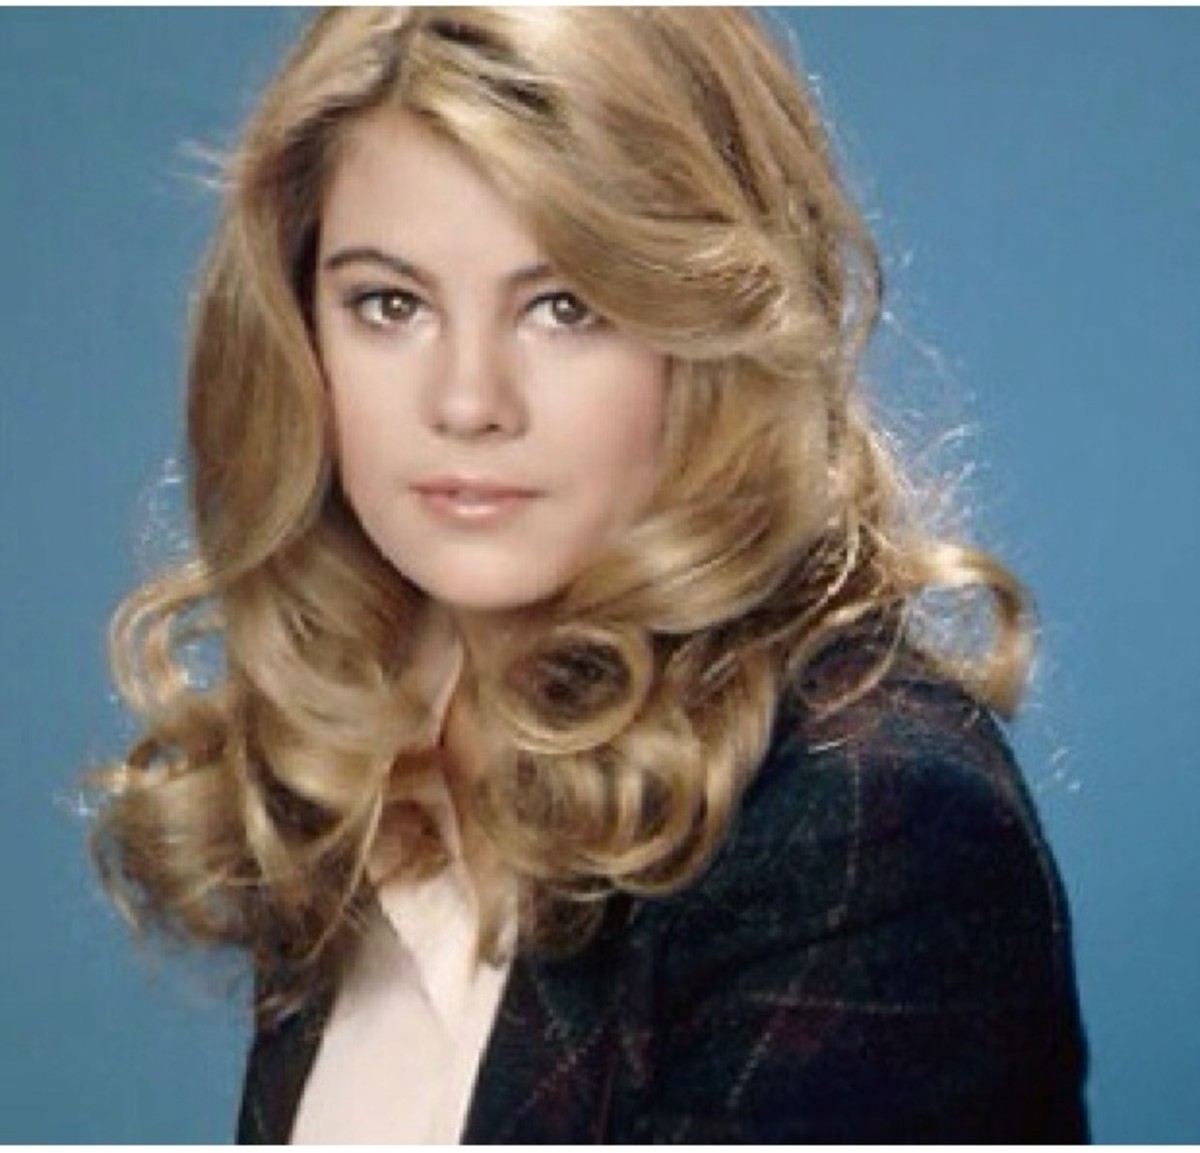 Blair Warner on "The Facts of Life" had the prettiest blonde hair and brown eyes.